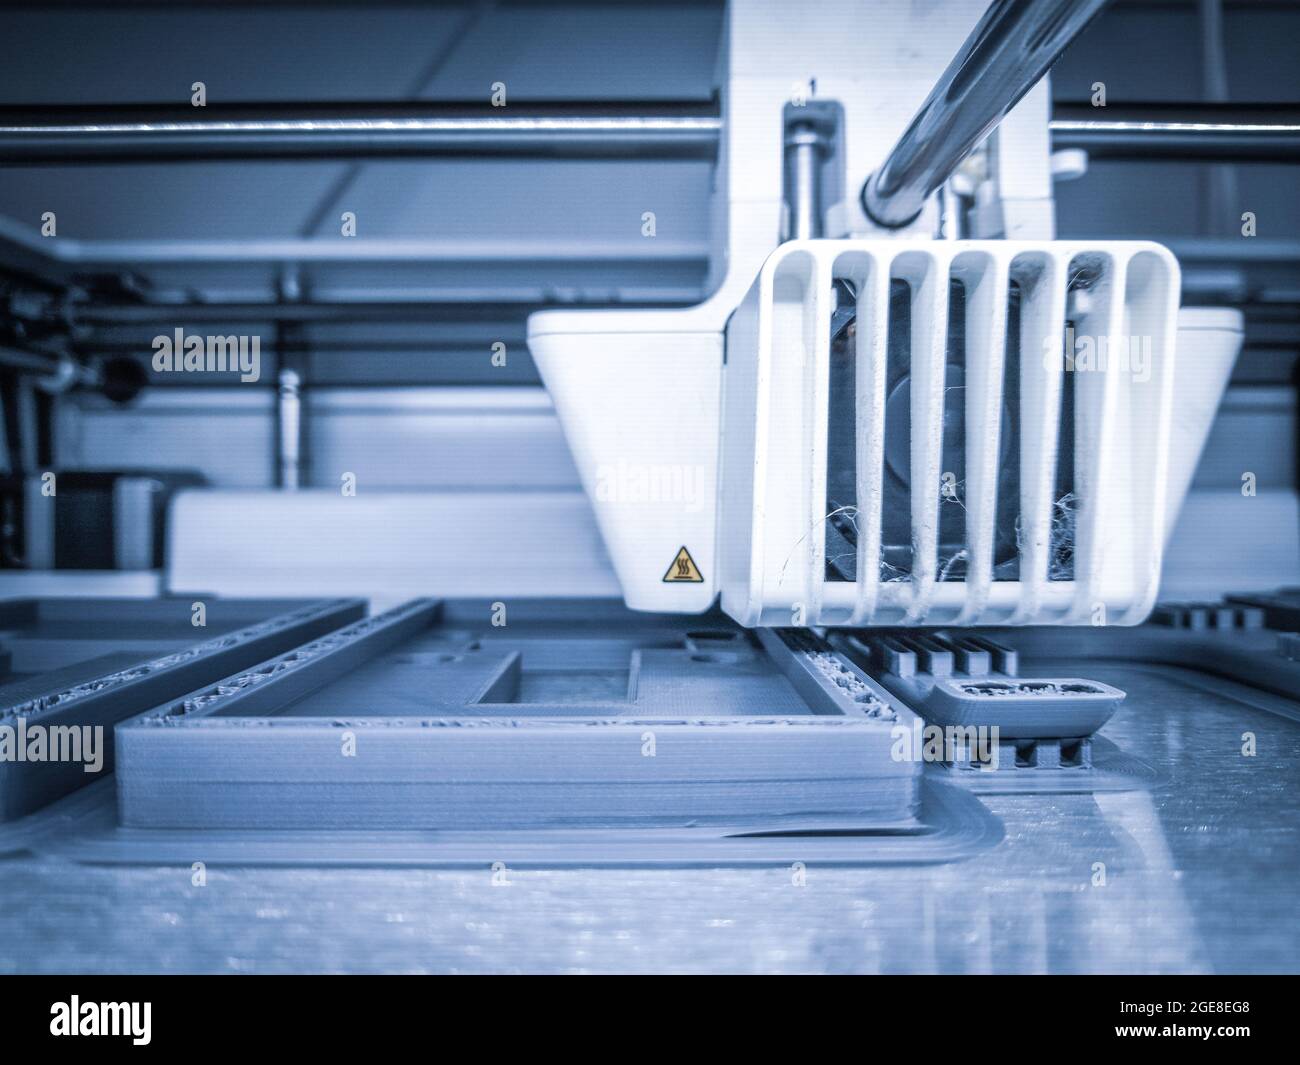 3D printer, printing with plastic wire filament in additive manufacturing technique. Stock Photo